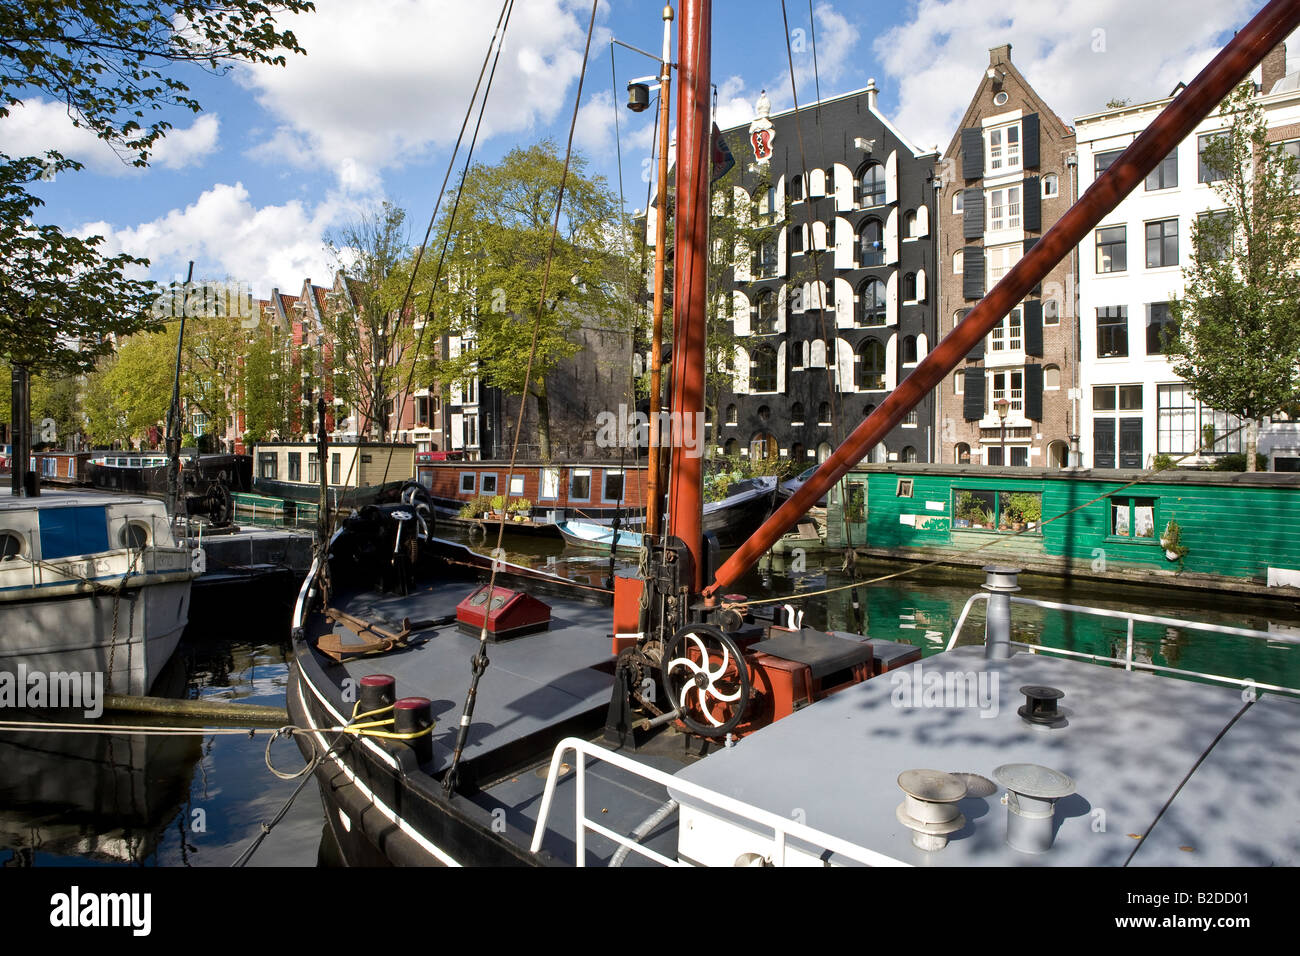 Canalside Scene in Amsterdam, North Holland, Netherlands. Contrasting styles of living in the boat and upmarket apartments Stock Photo